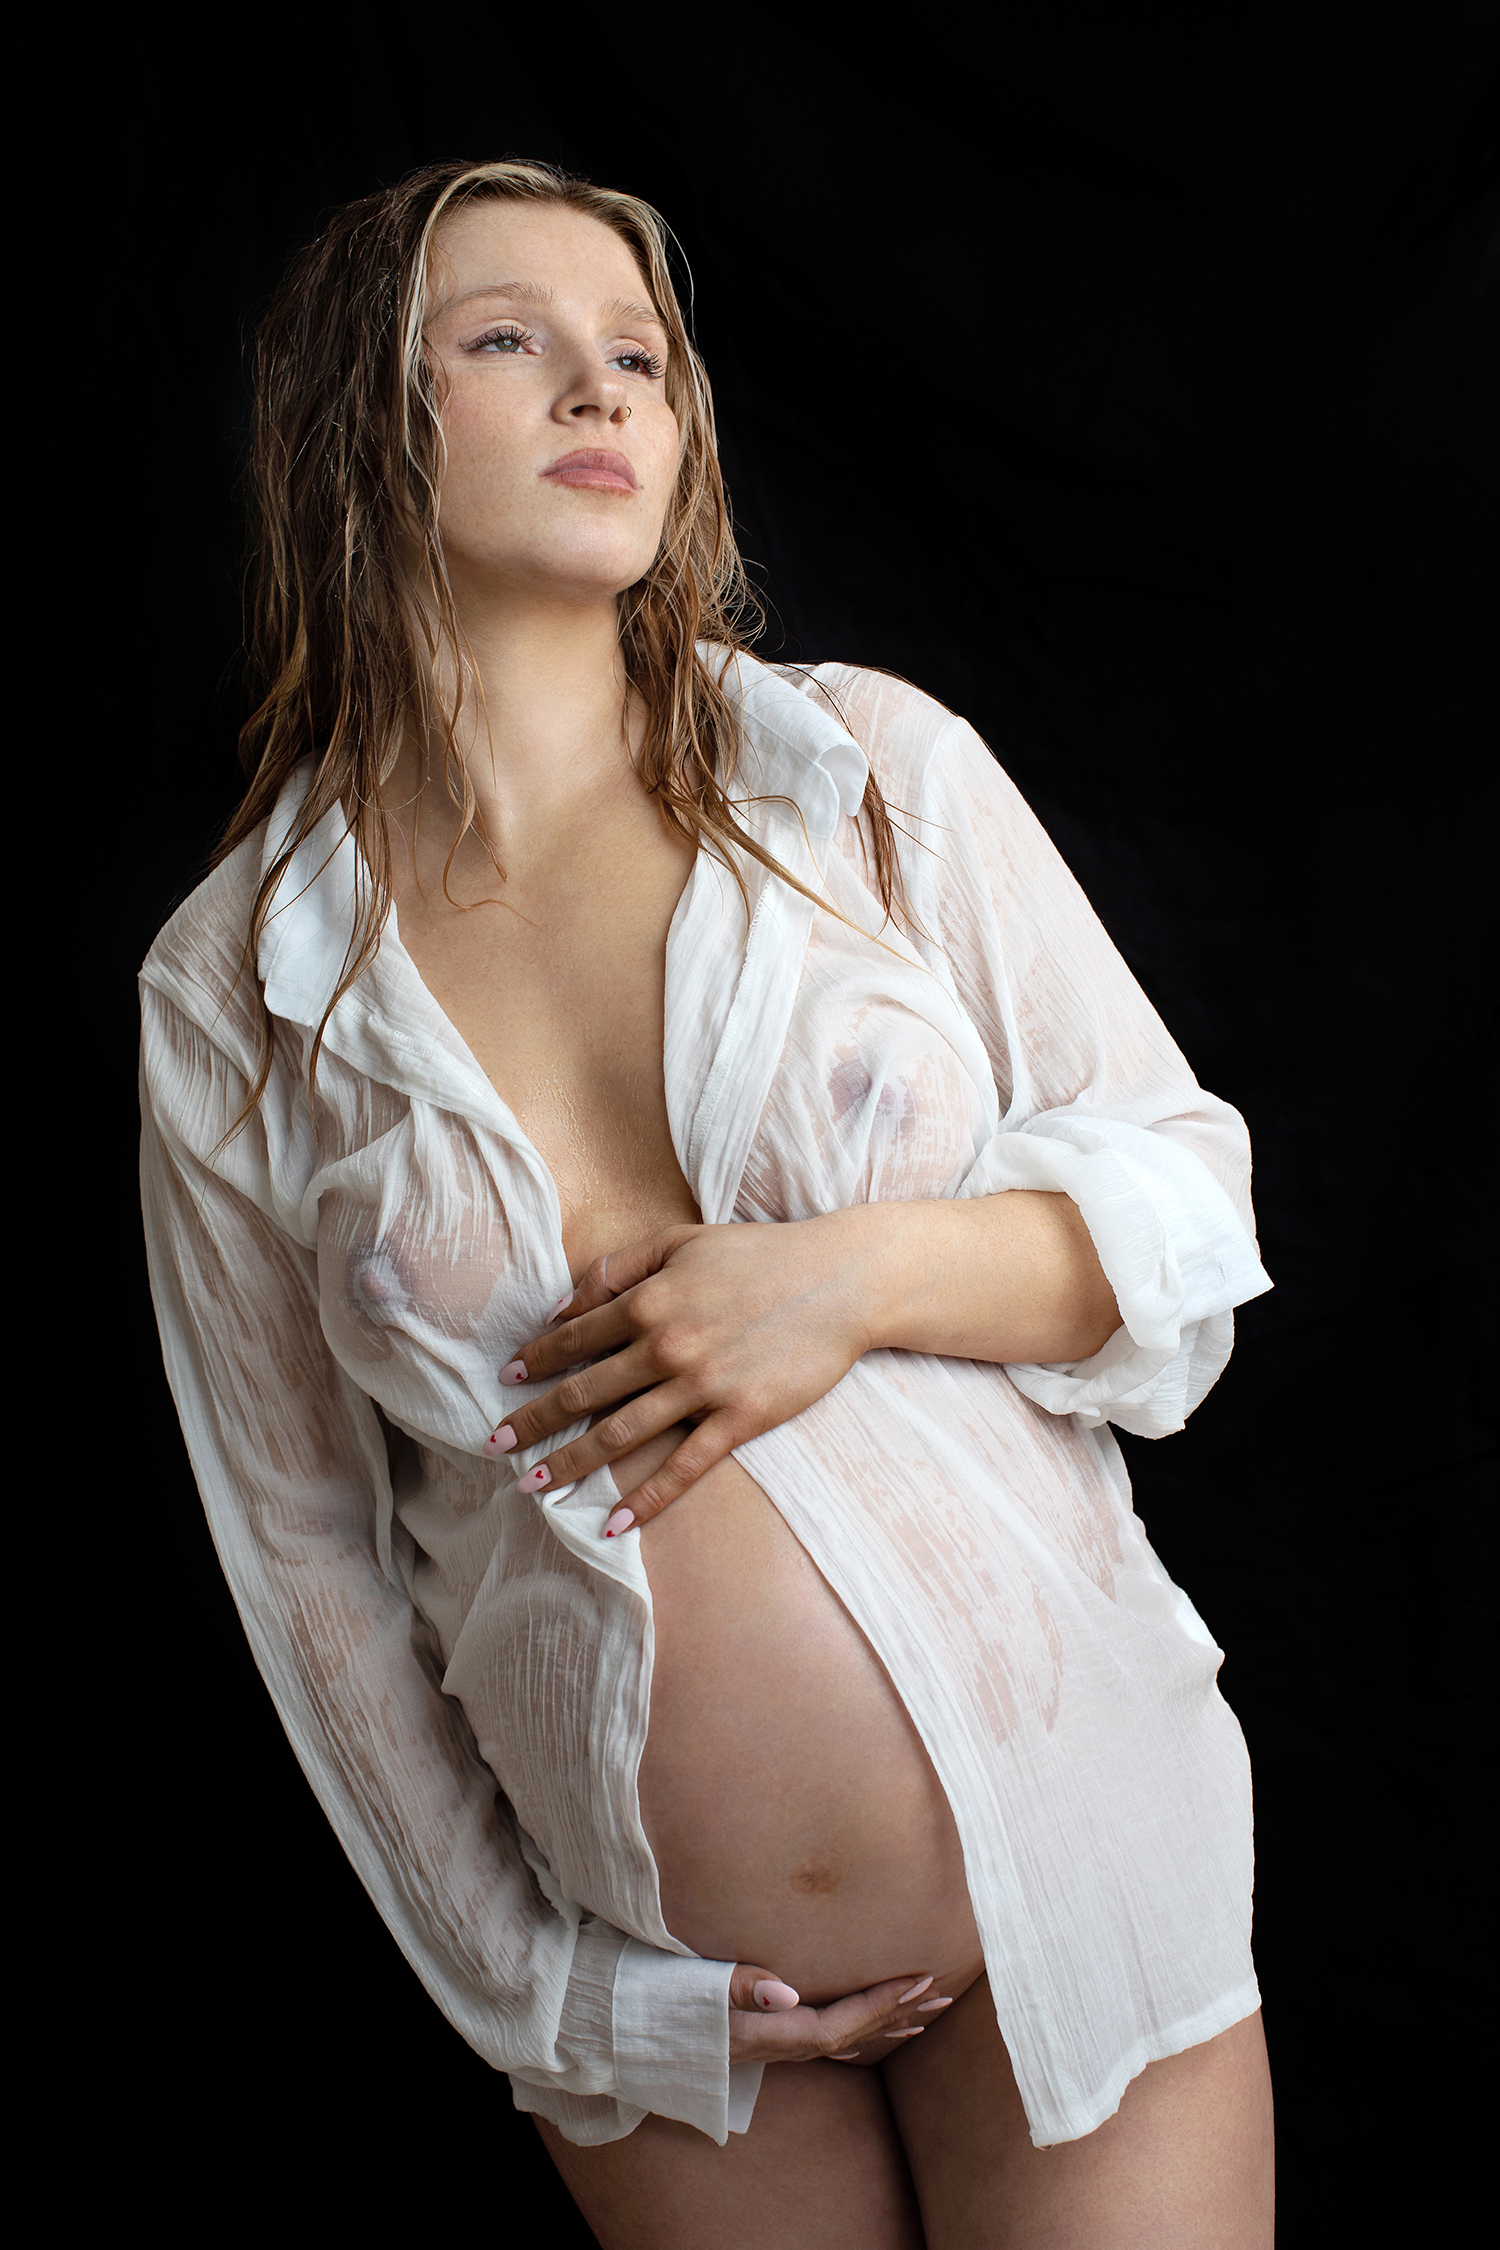 A pensive pregnant woman is capturedin a luxury maternity photoshoot, exuding confidence and beauty.